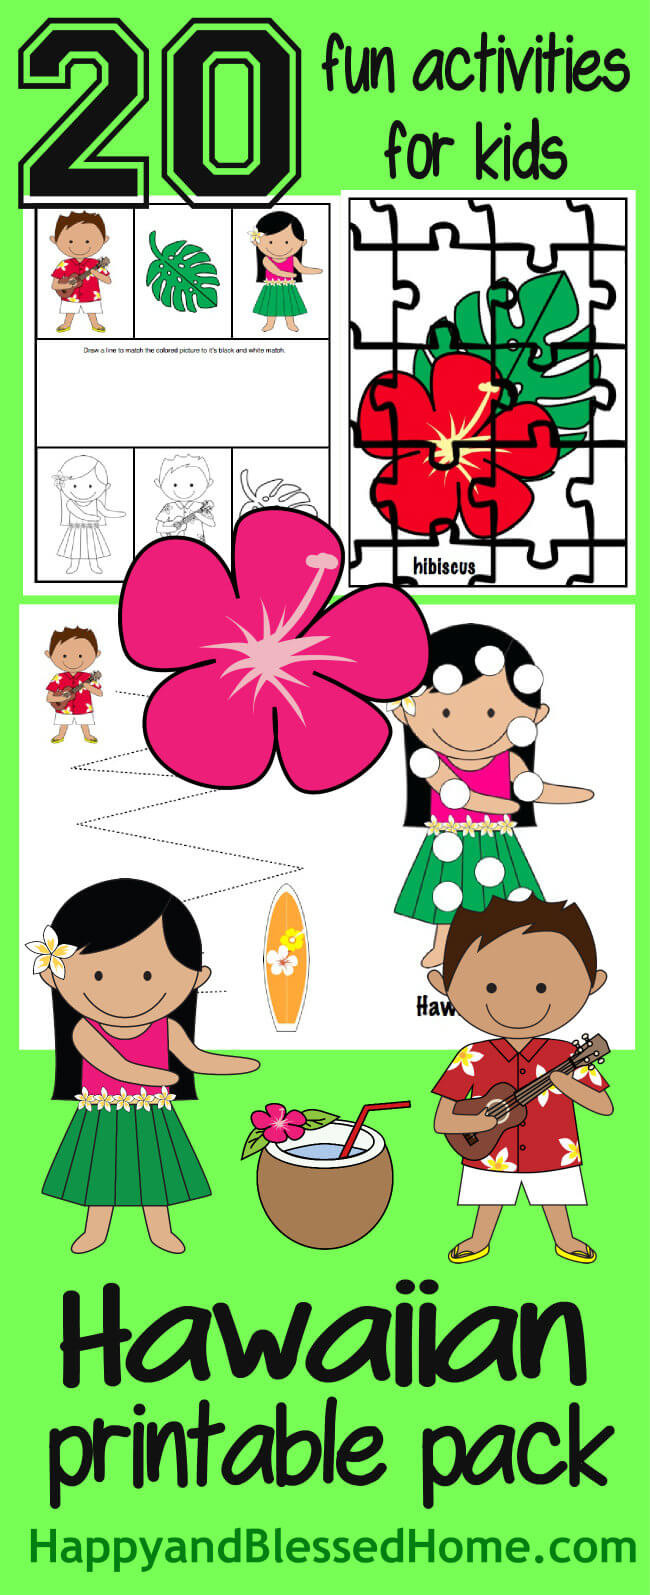 Luau Party Games For Kids
 Download your Hawaiian Luau Party Pack Here Happy and